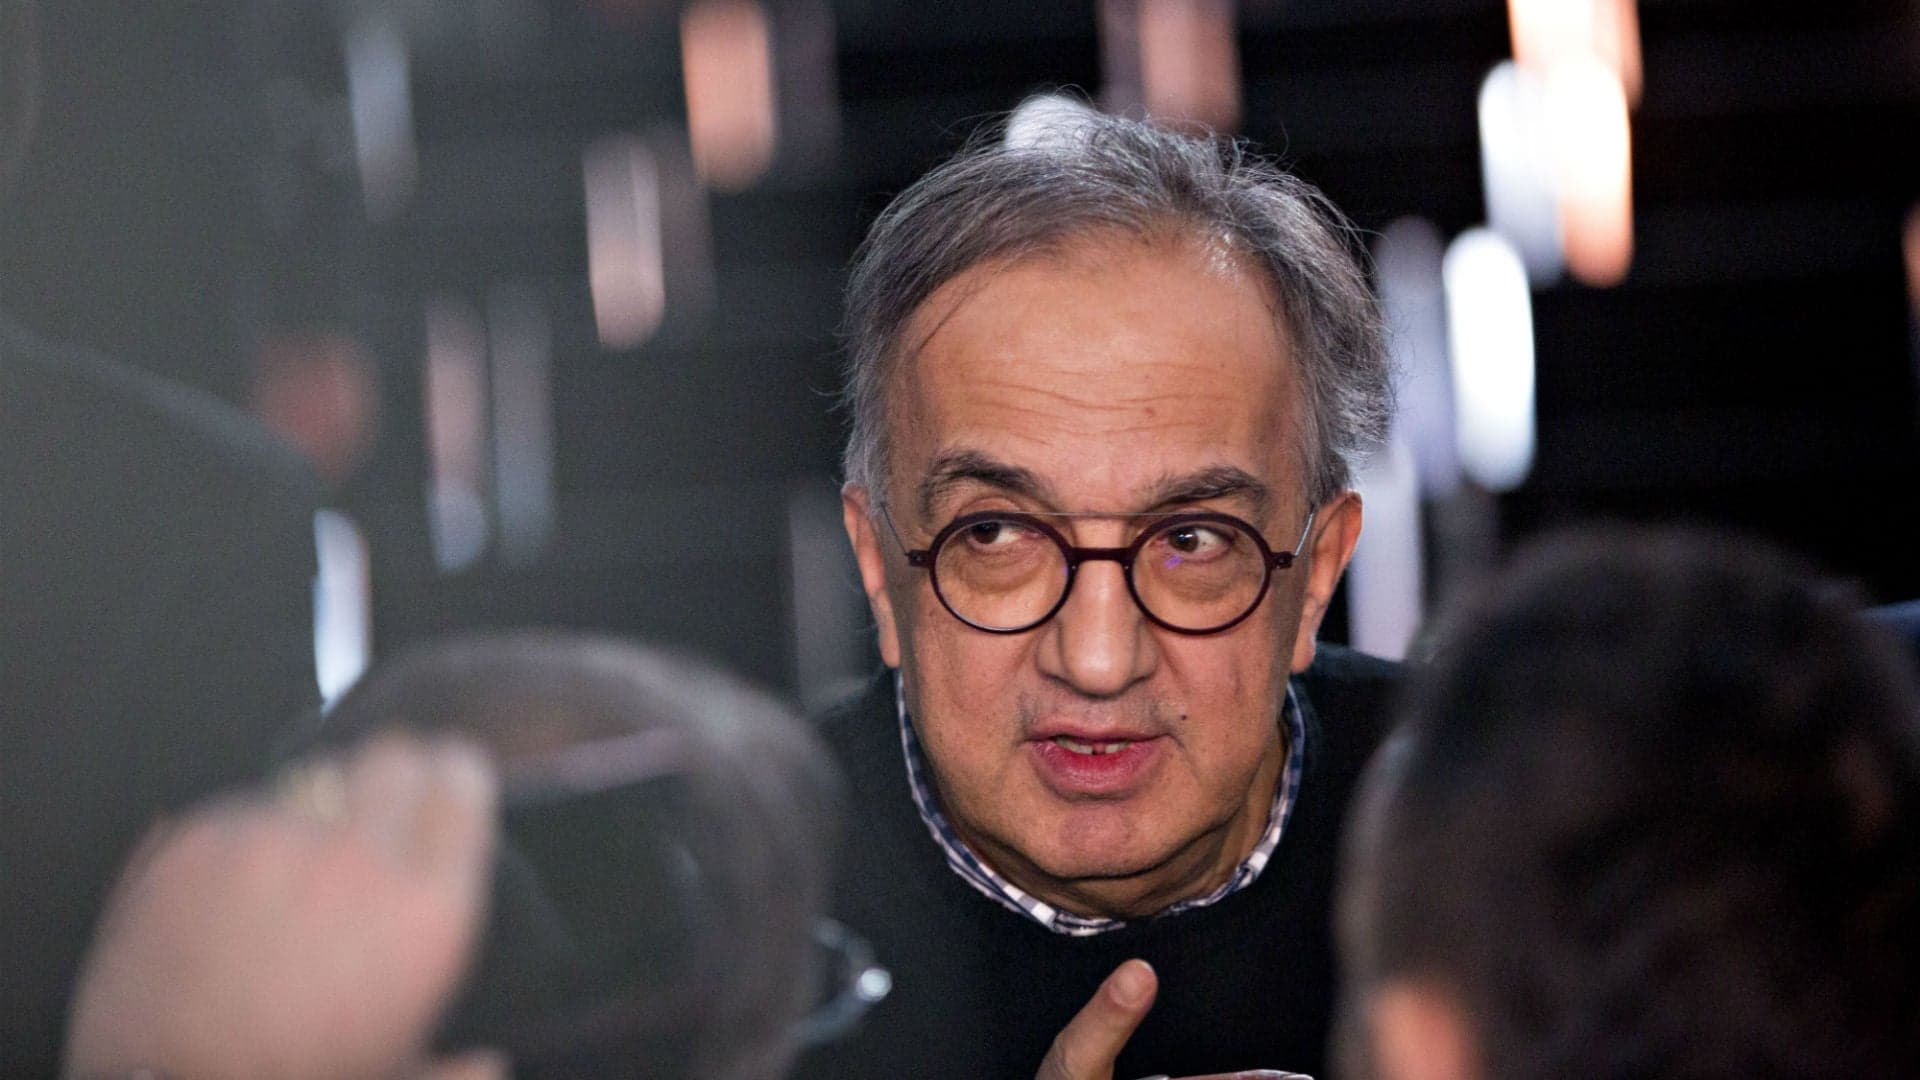 Fiat Chrysler Boss Marchionne Made Nearly $12 Million in 2017